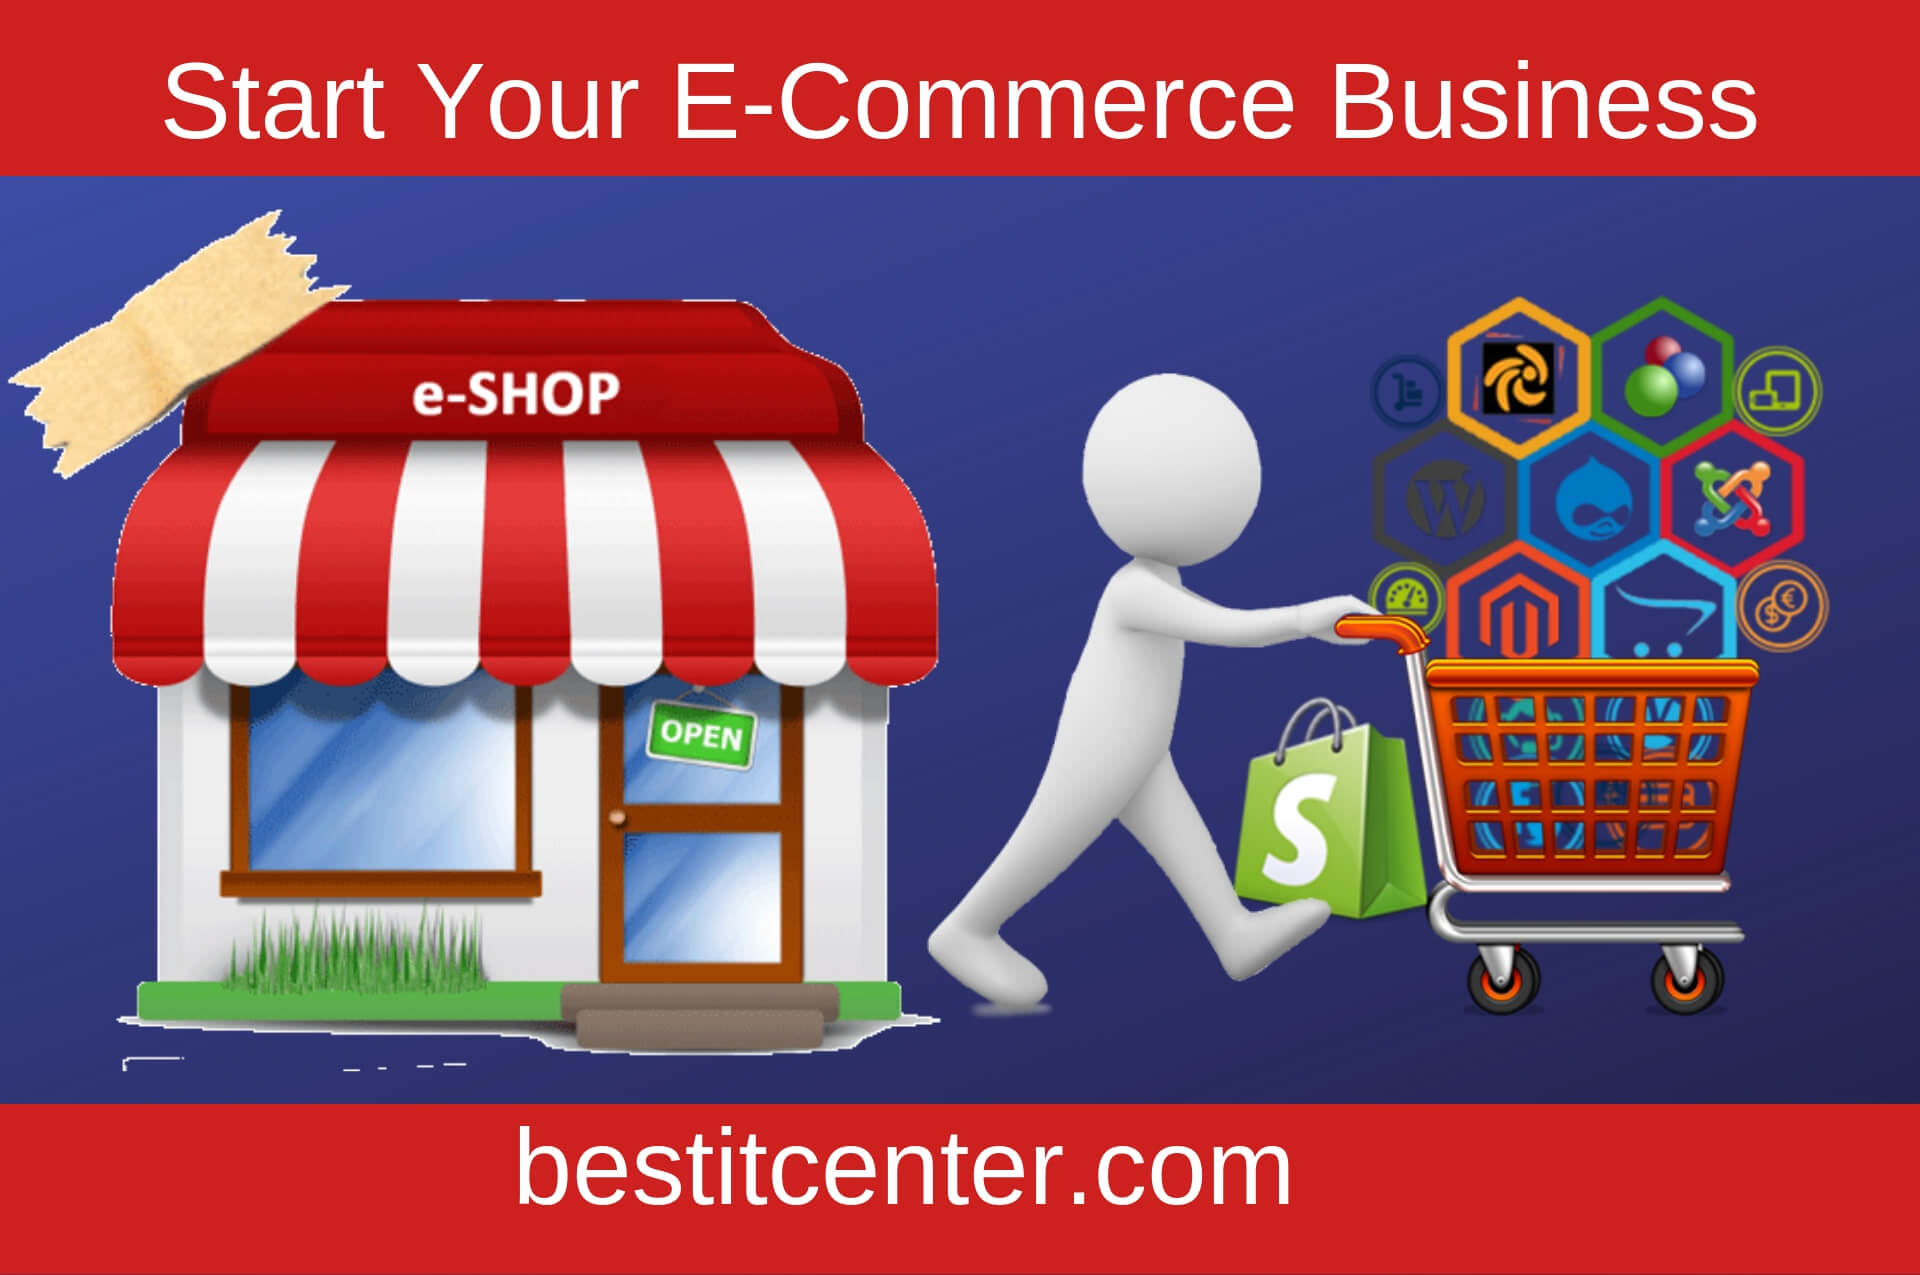 Start your eCommerce business now